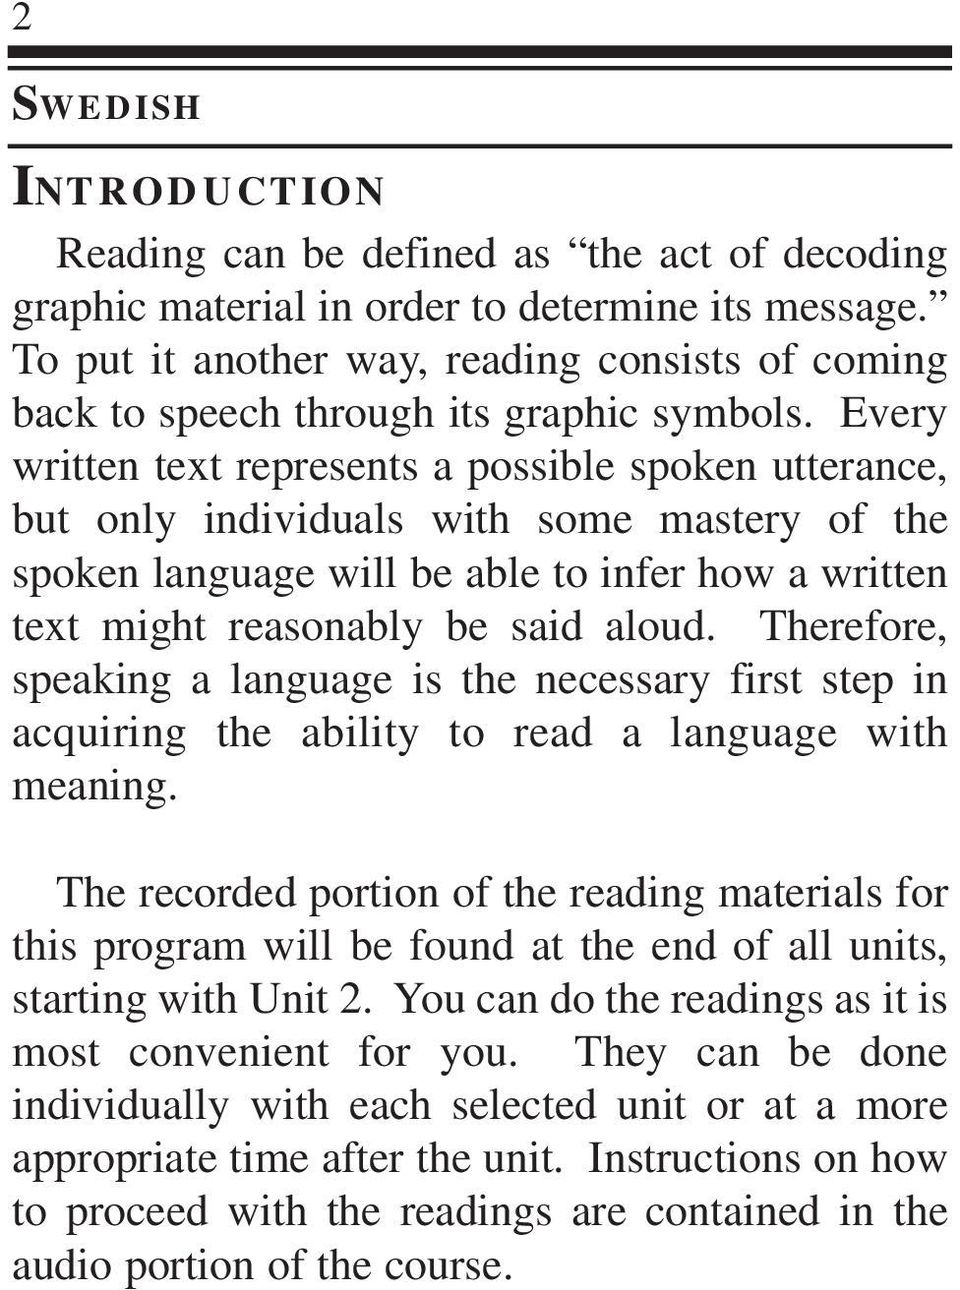 Every written text represents a possible spoken utterance, but only individuals with some mastery of the spoken language will be able to infer how a written text might reasonably be said aloud.